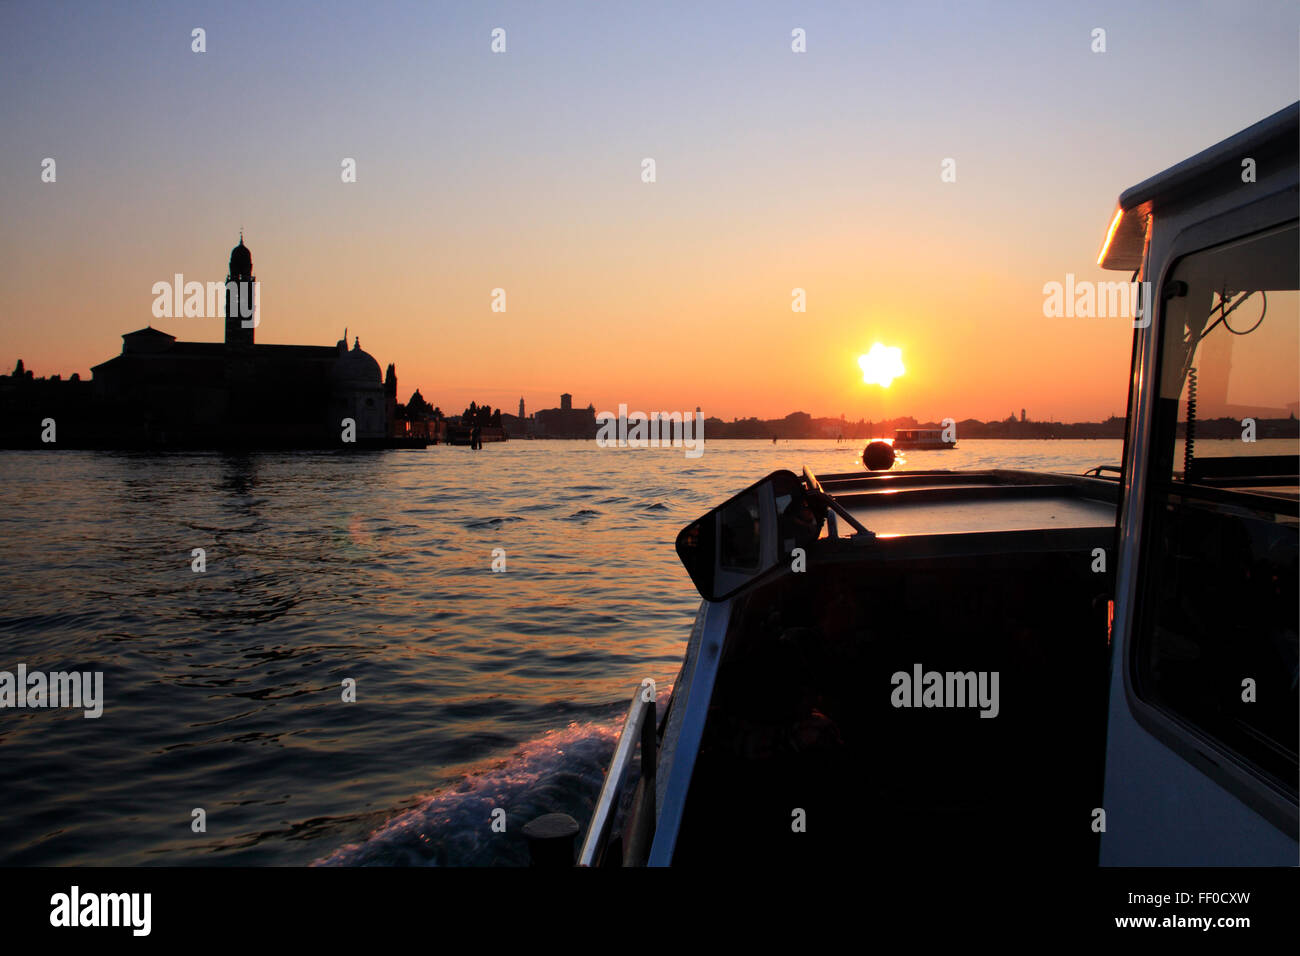 Boats on The Grand Canal in Venice, Italy at sunset Stock Photo